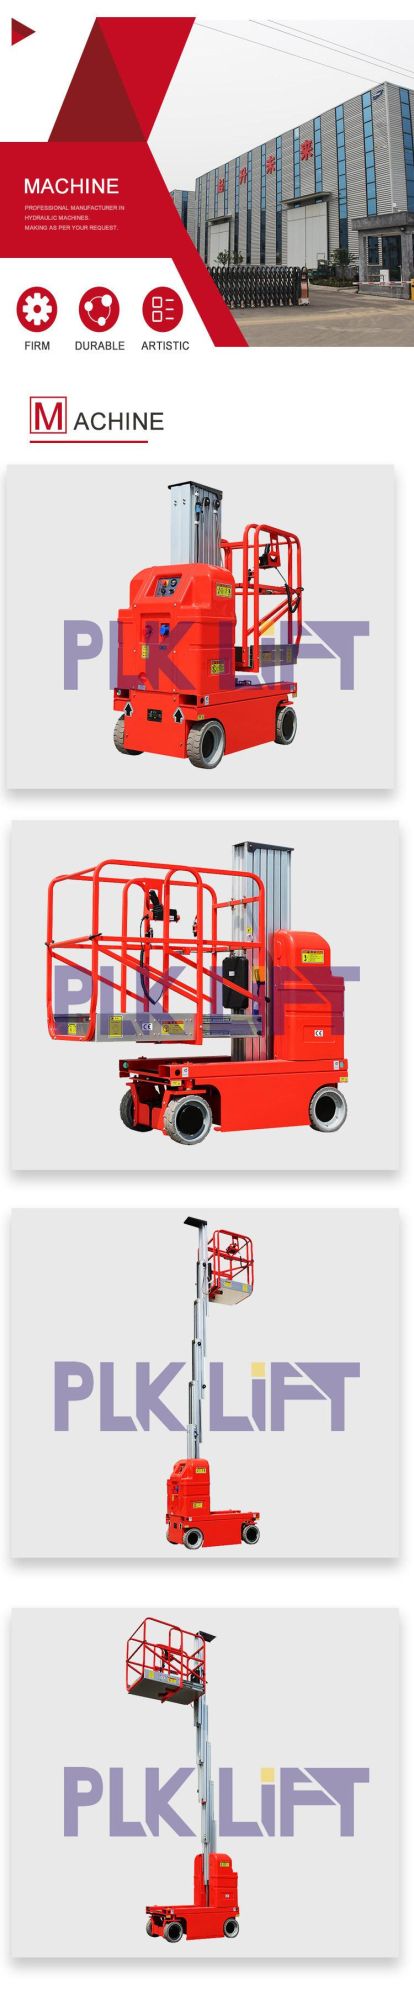 CE Hydraulic Driveable Vertical Mast Aerial Man Lift